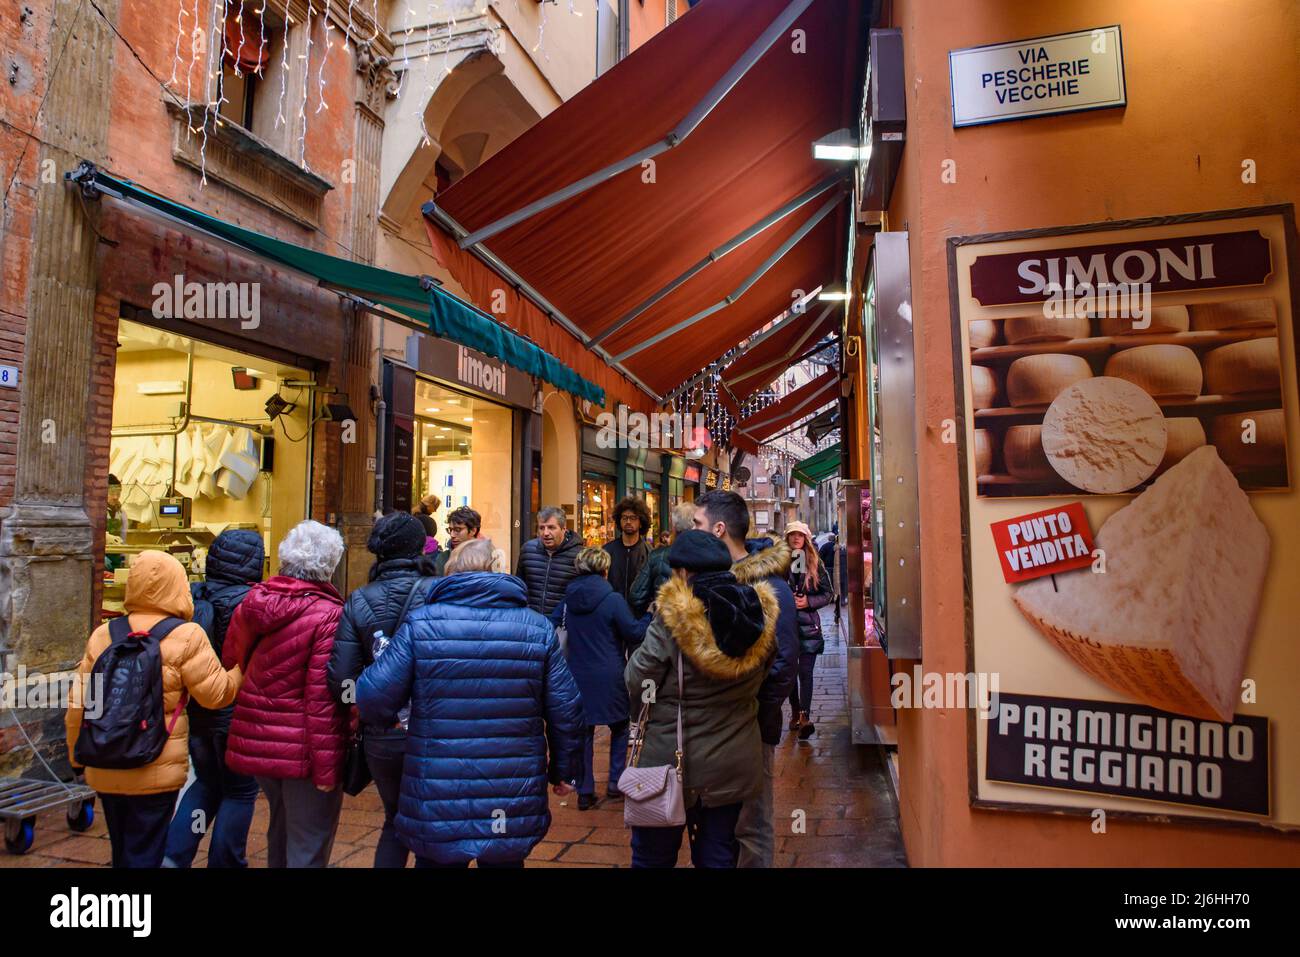 People walking on the street in the old town of Bologna, Italy Stock Photo